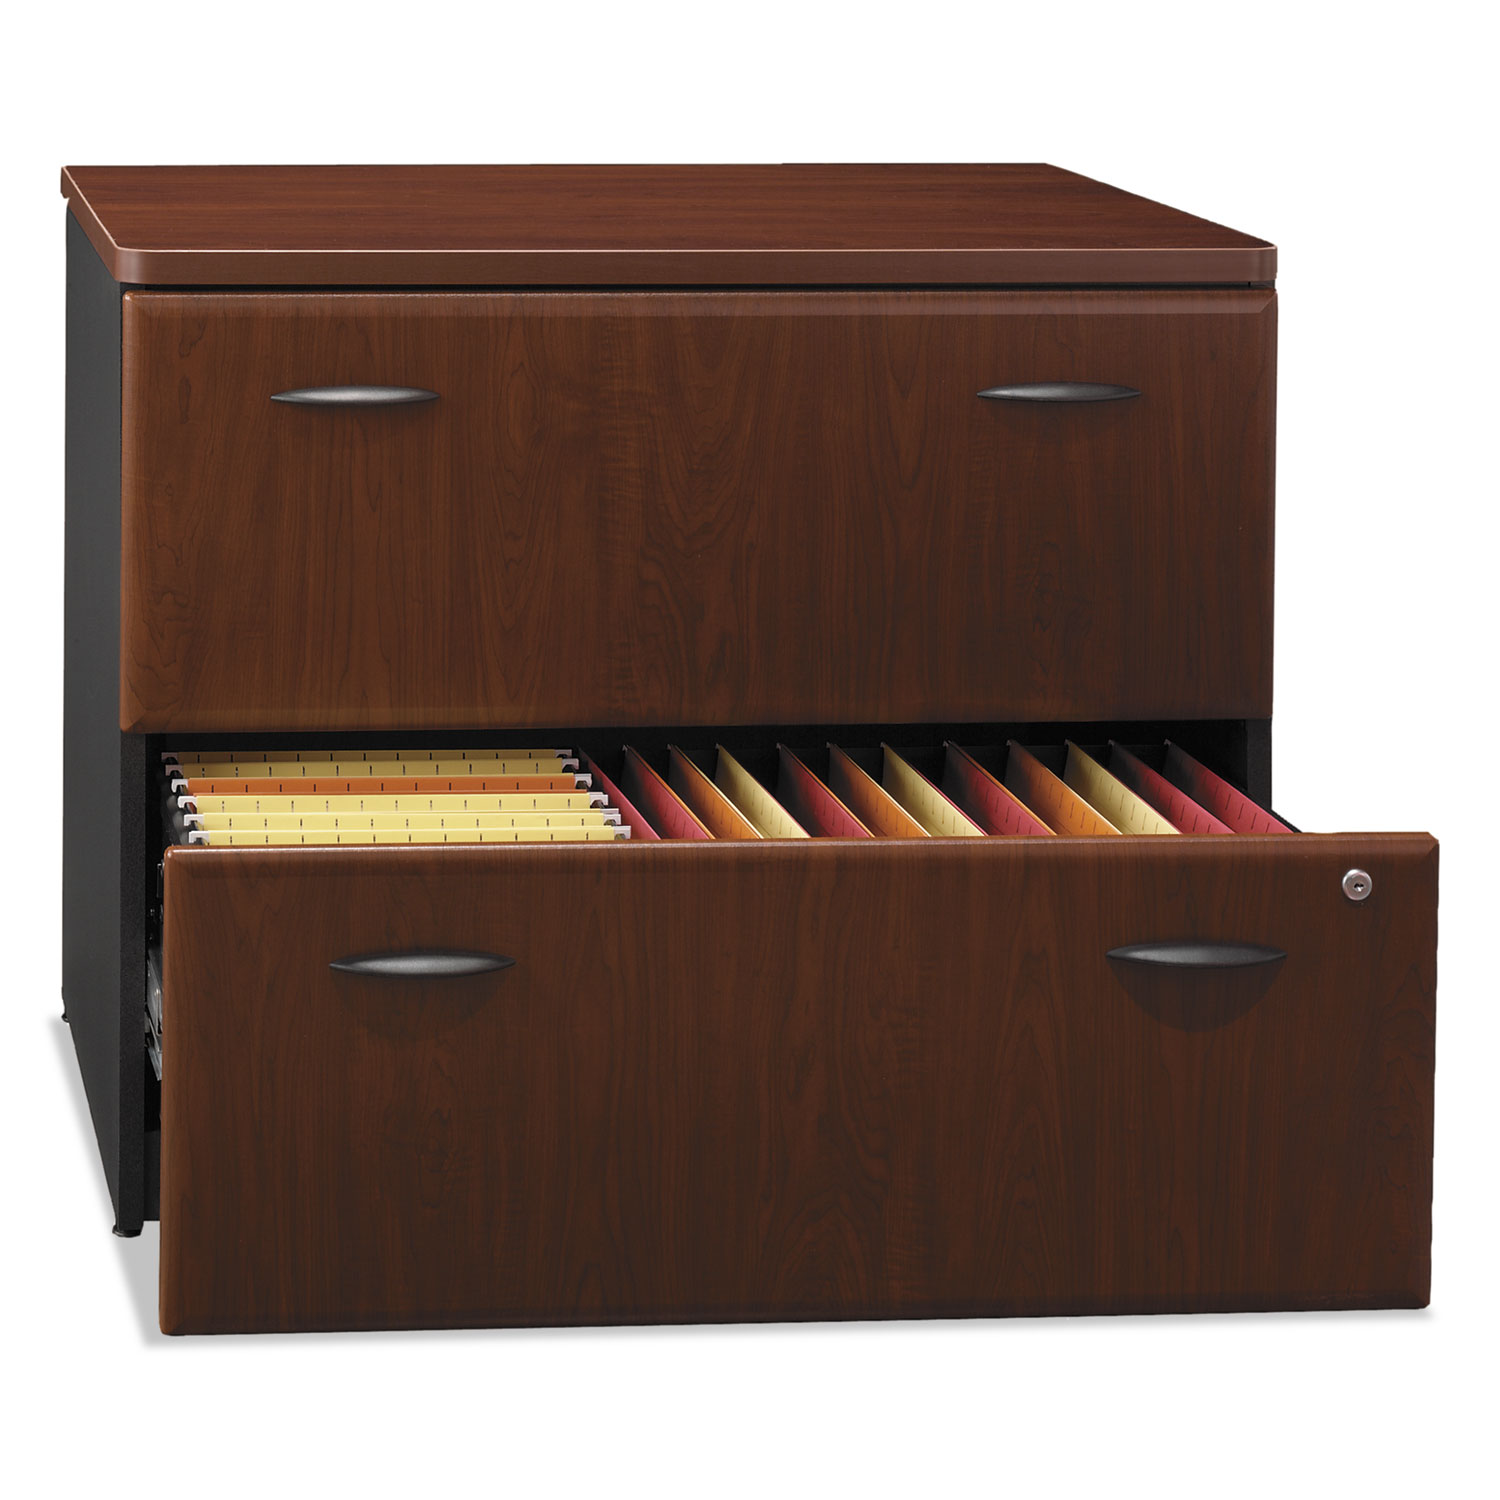 Series A Collection 2 Drawer 36W Lateral File (Assembled), Hansen Cherry